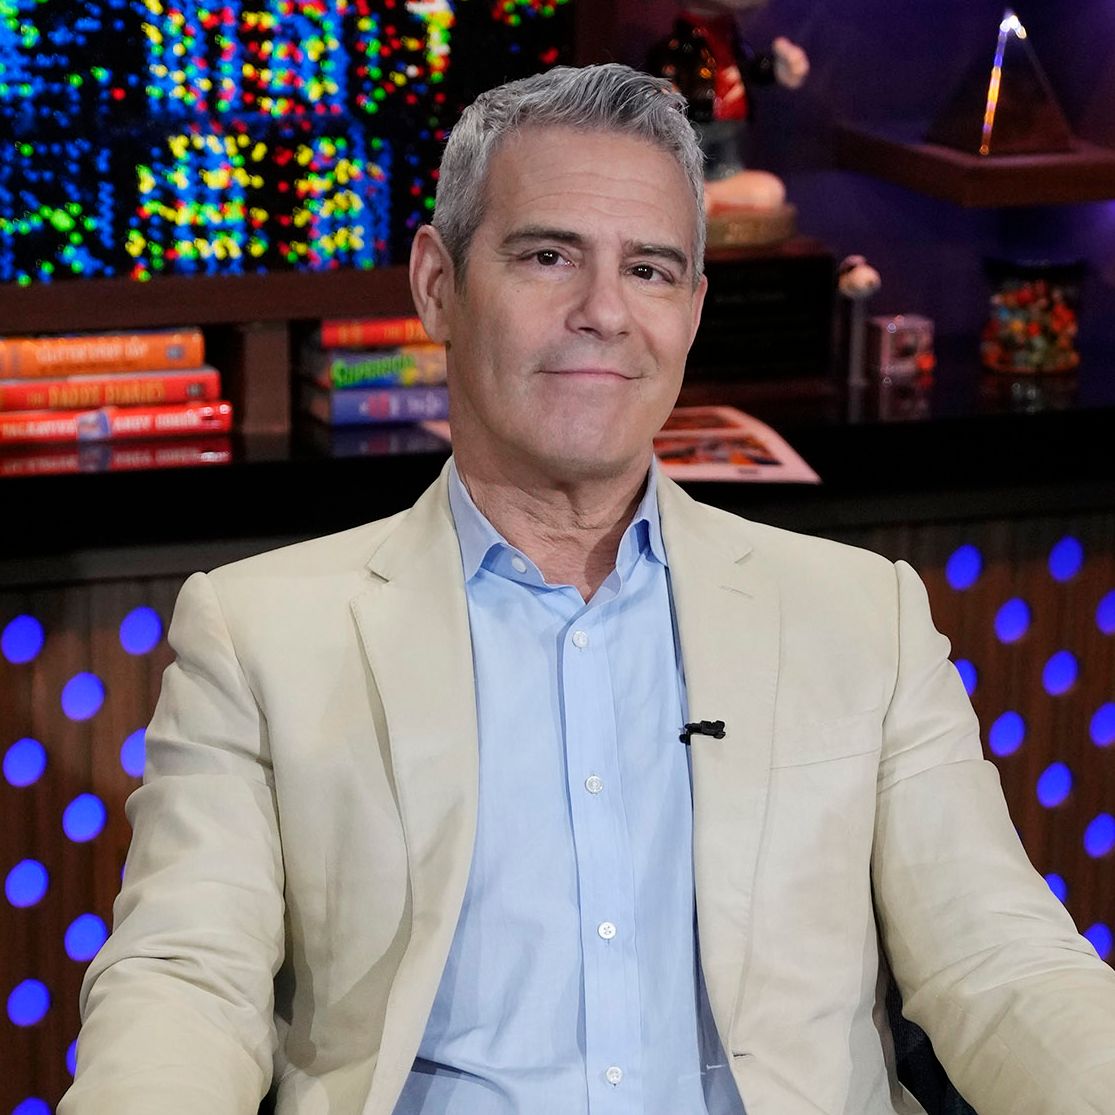 Andy Cohen on 'Real Housewives' Criticism: 'I Have No Regrets'